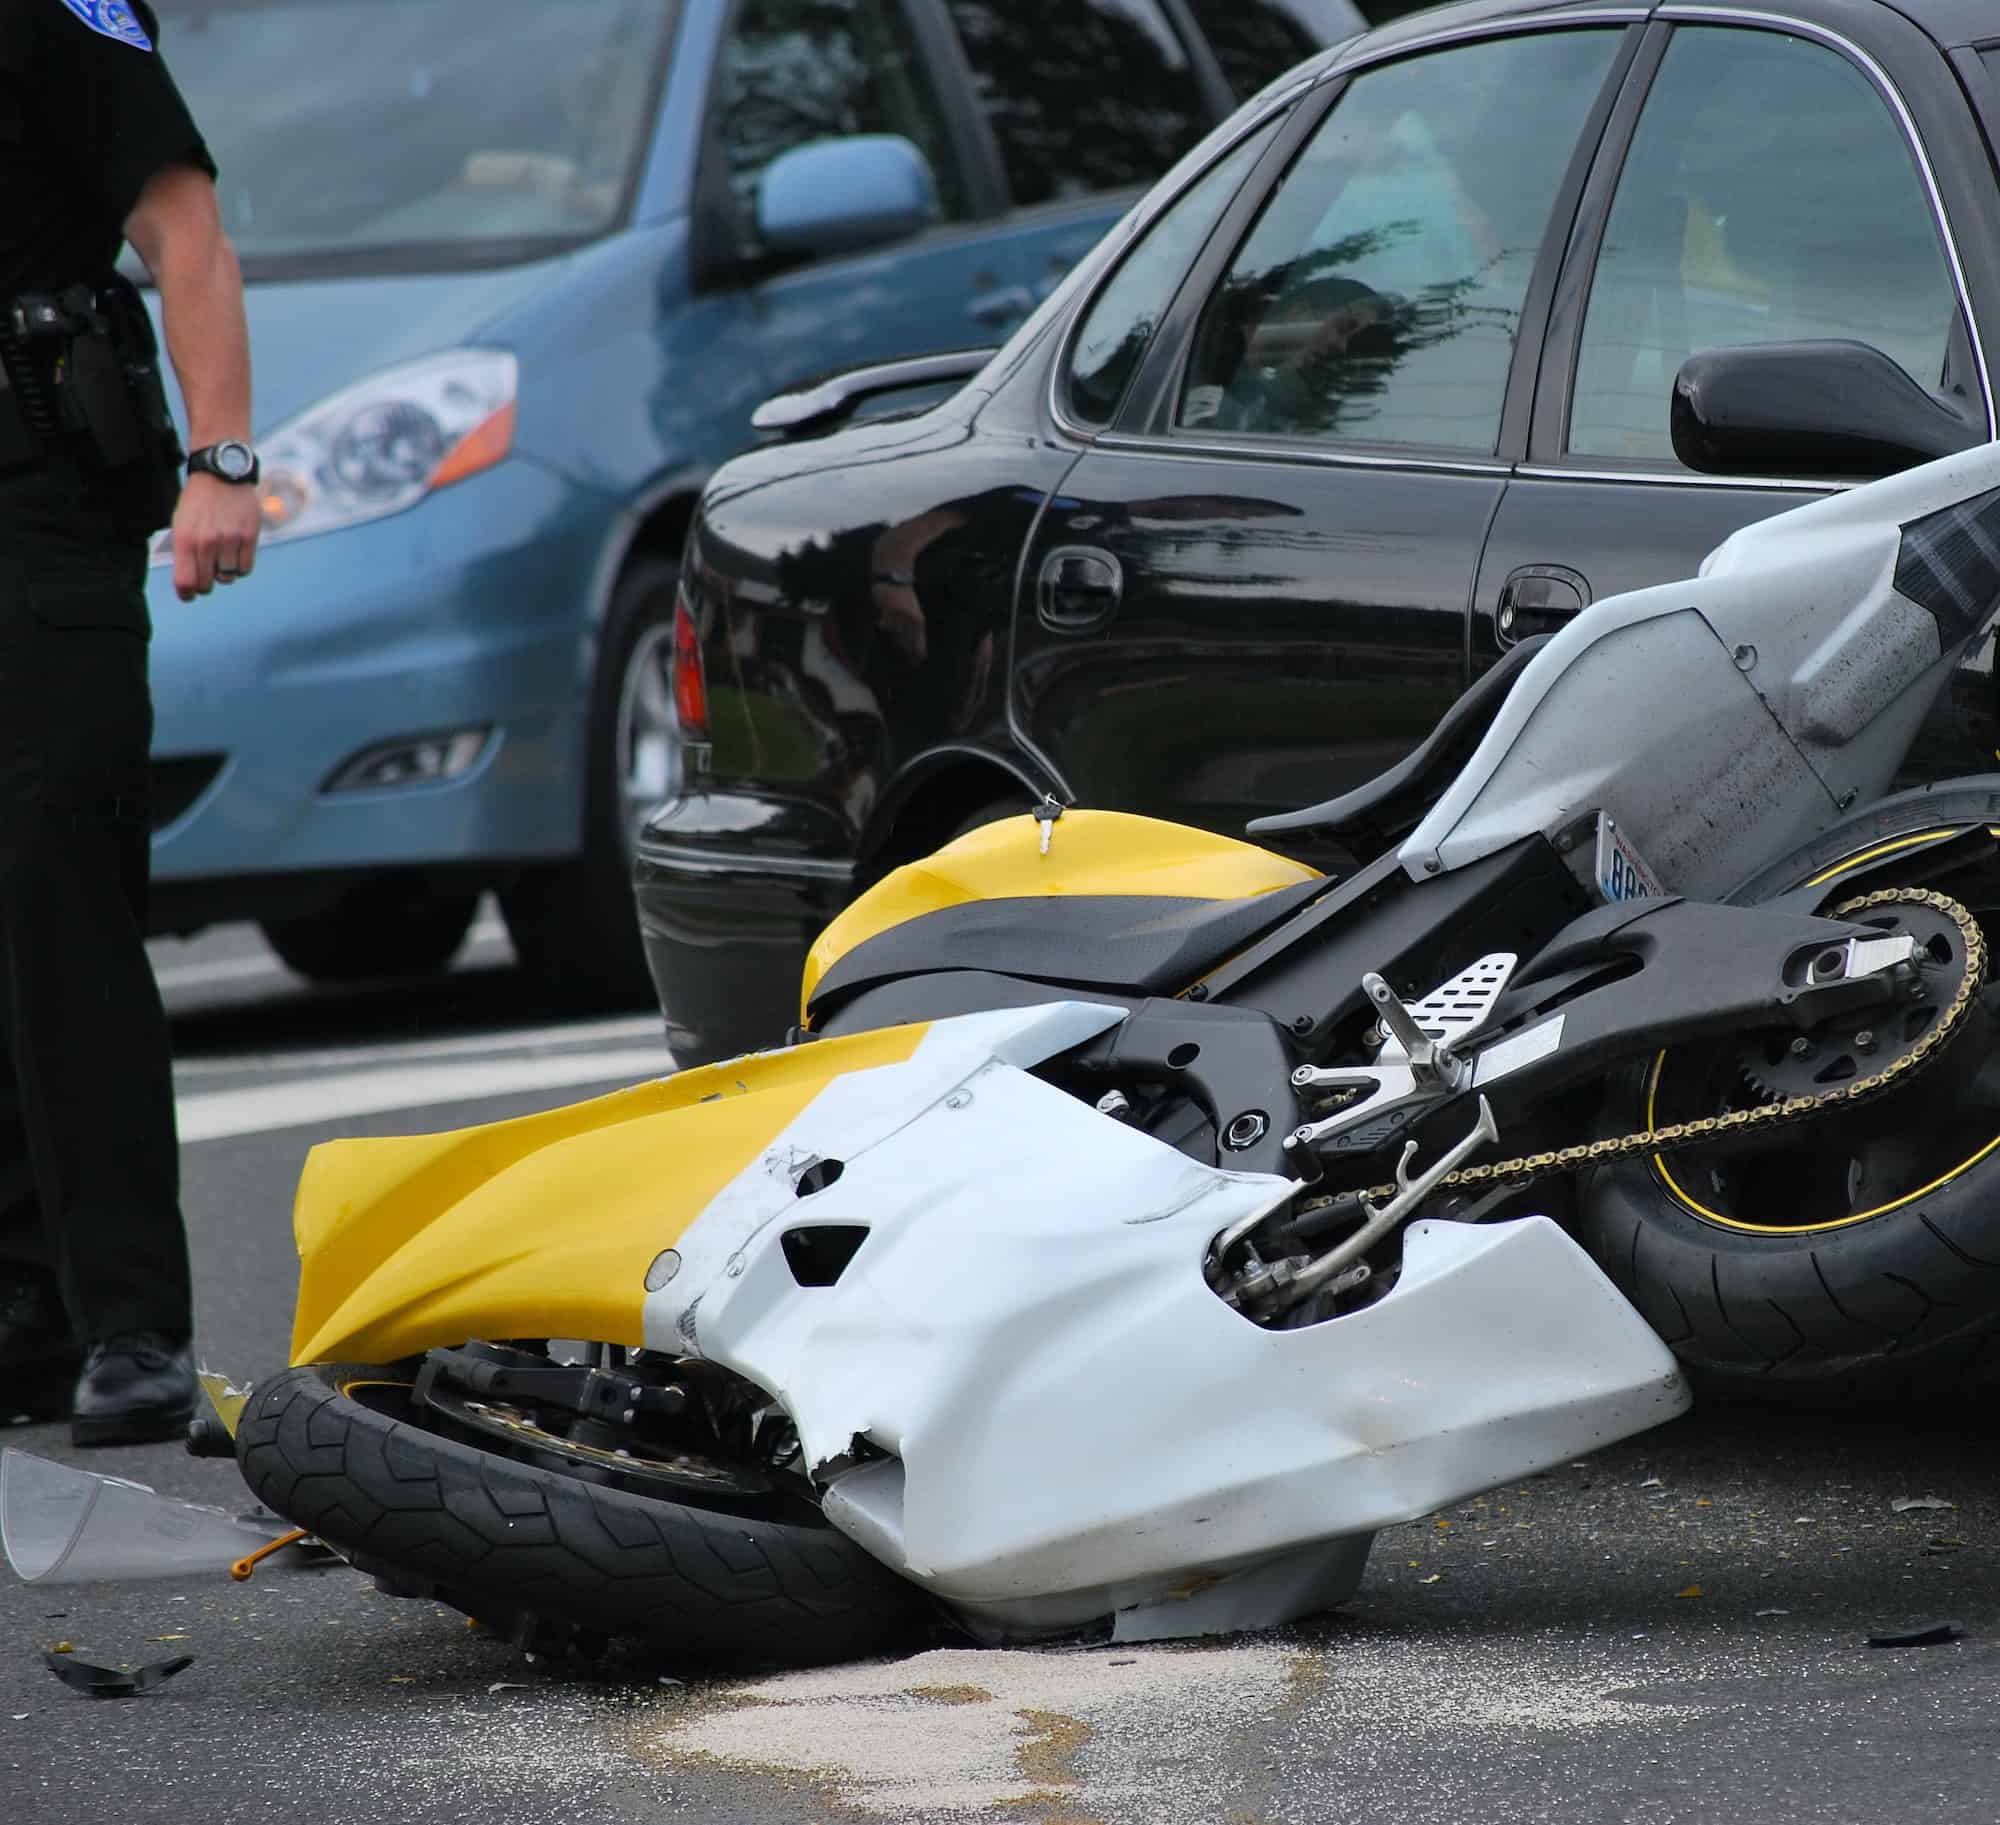 Unseen Dangers of Motorcycle Accidents - California Motorcycle accident attorneys - Razavi Law Group